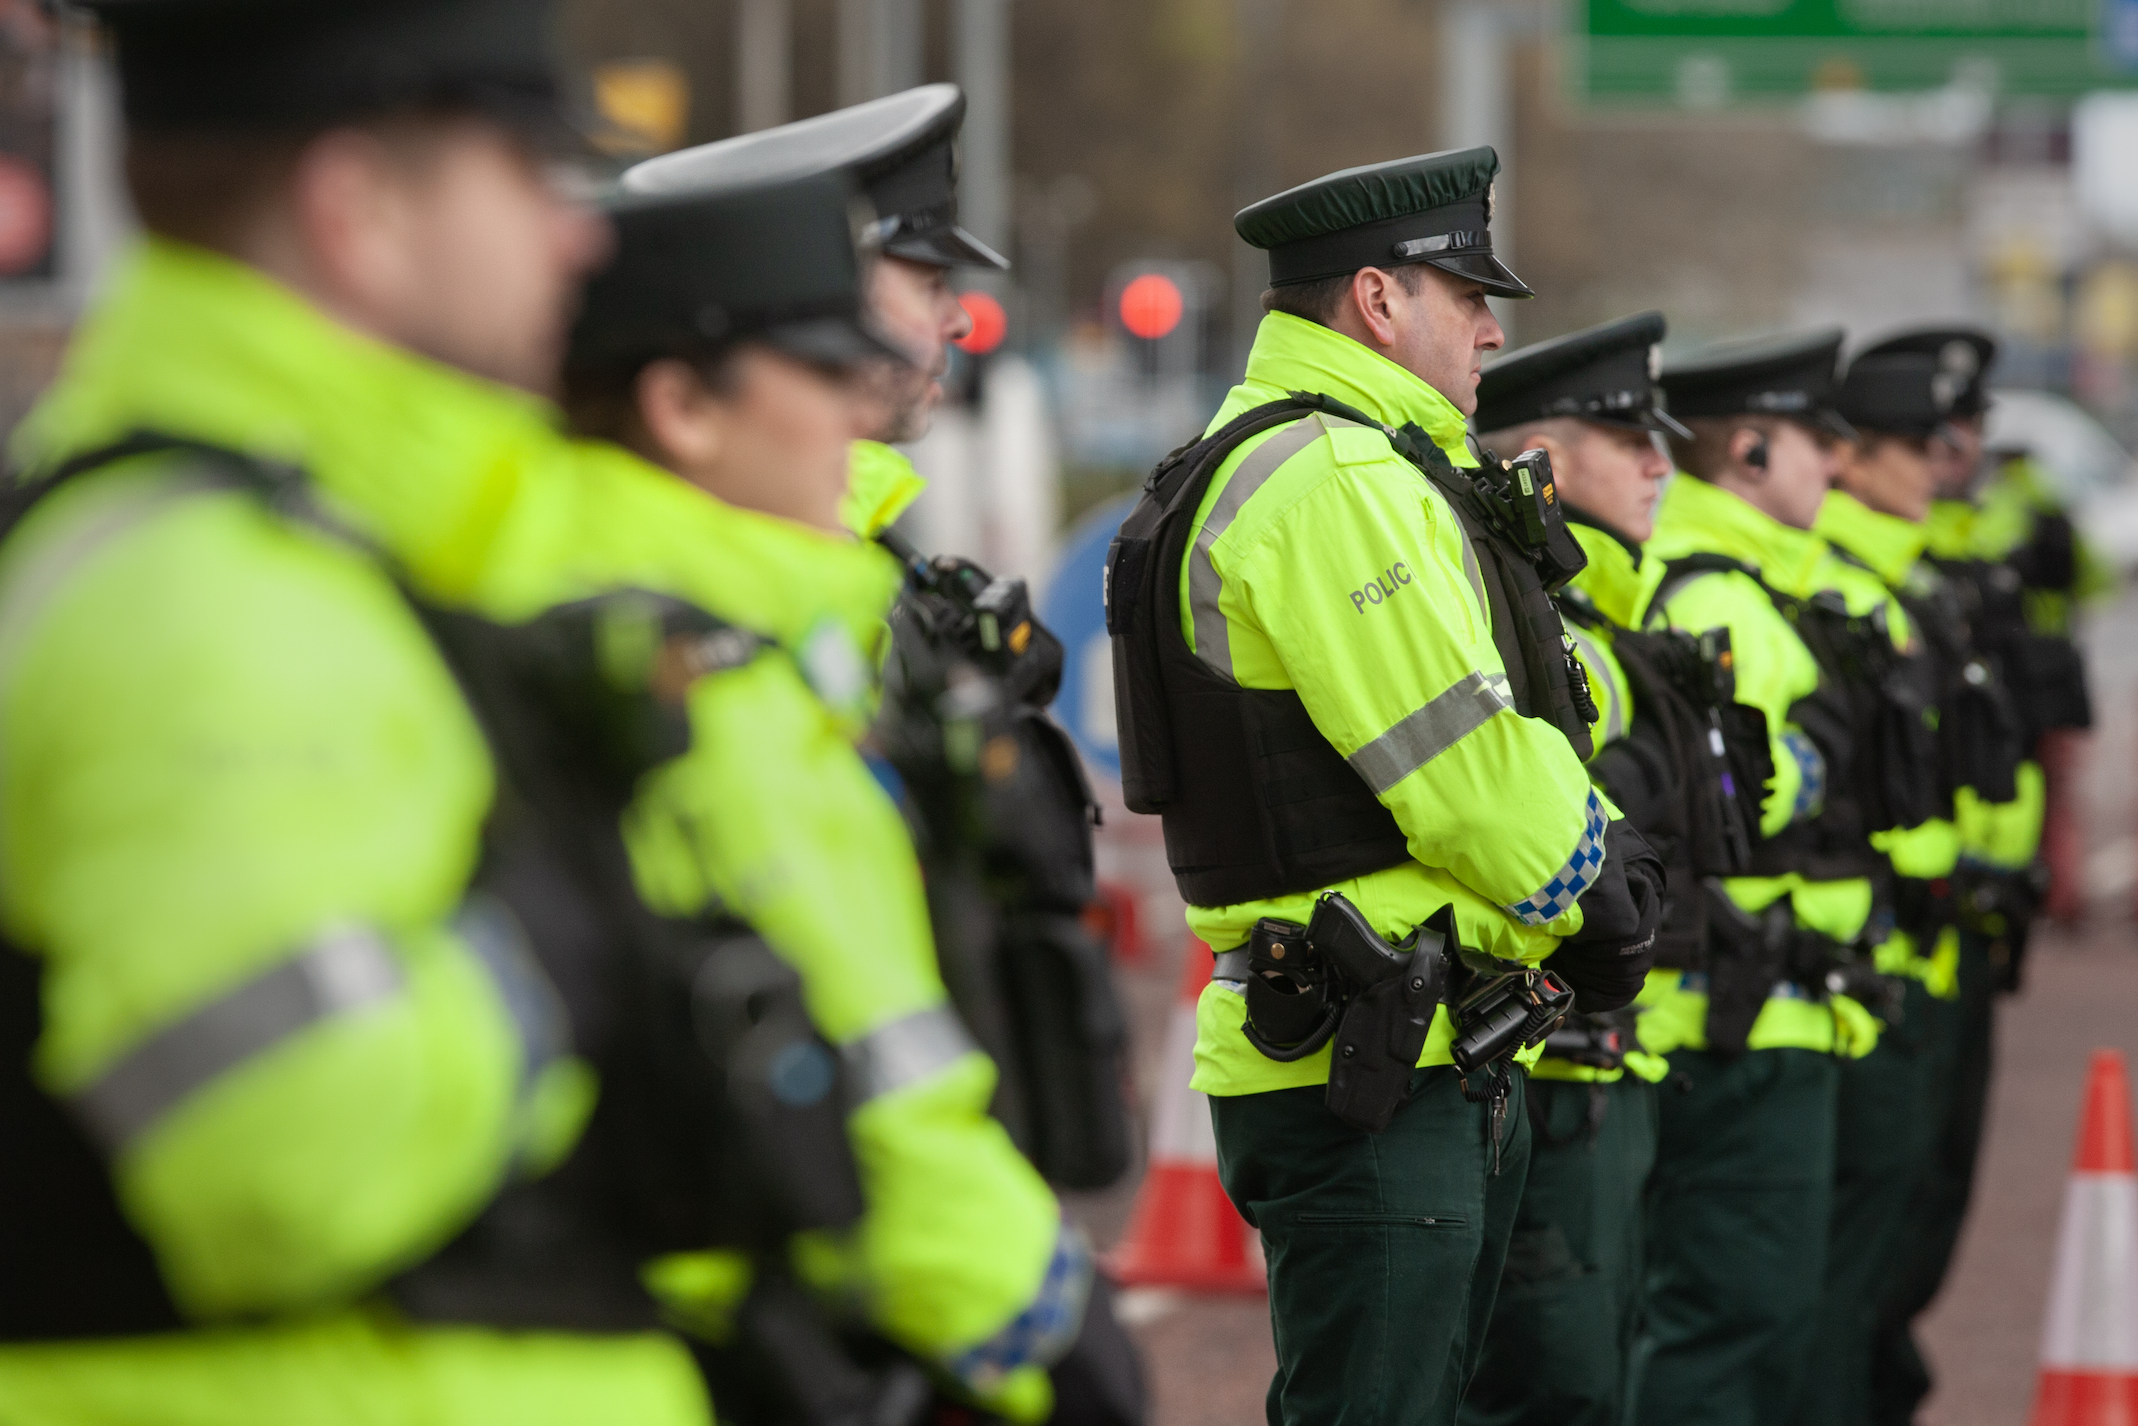 TIGHT LEASH: The DUP claim that the PSNI is controlled by Sinn Féin